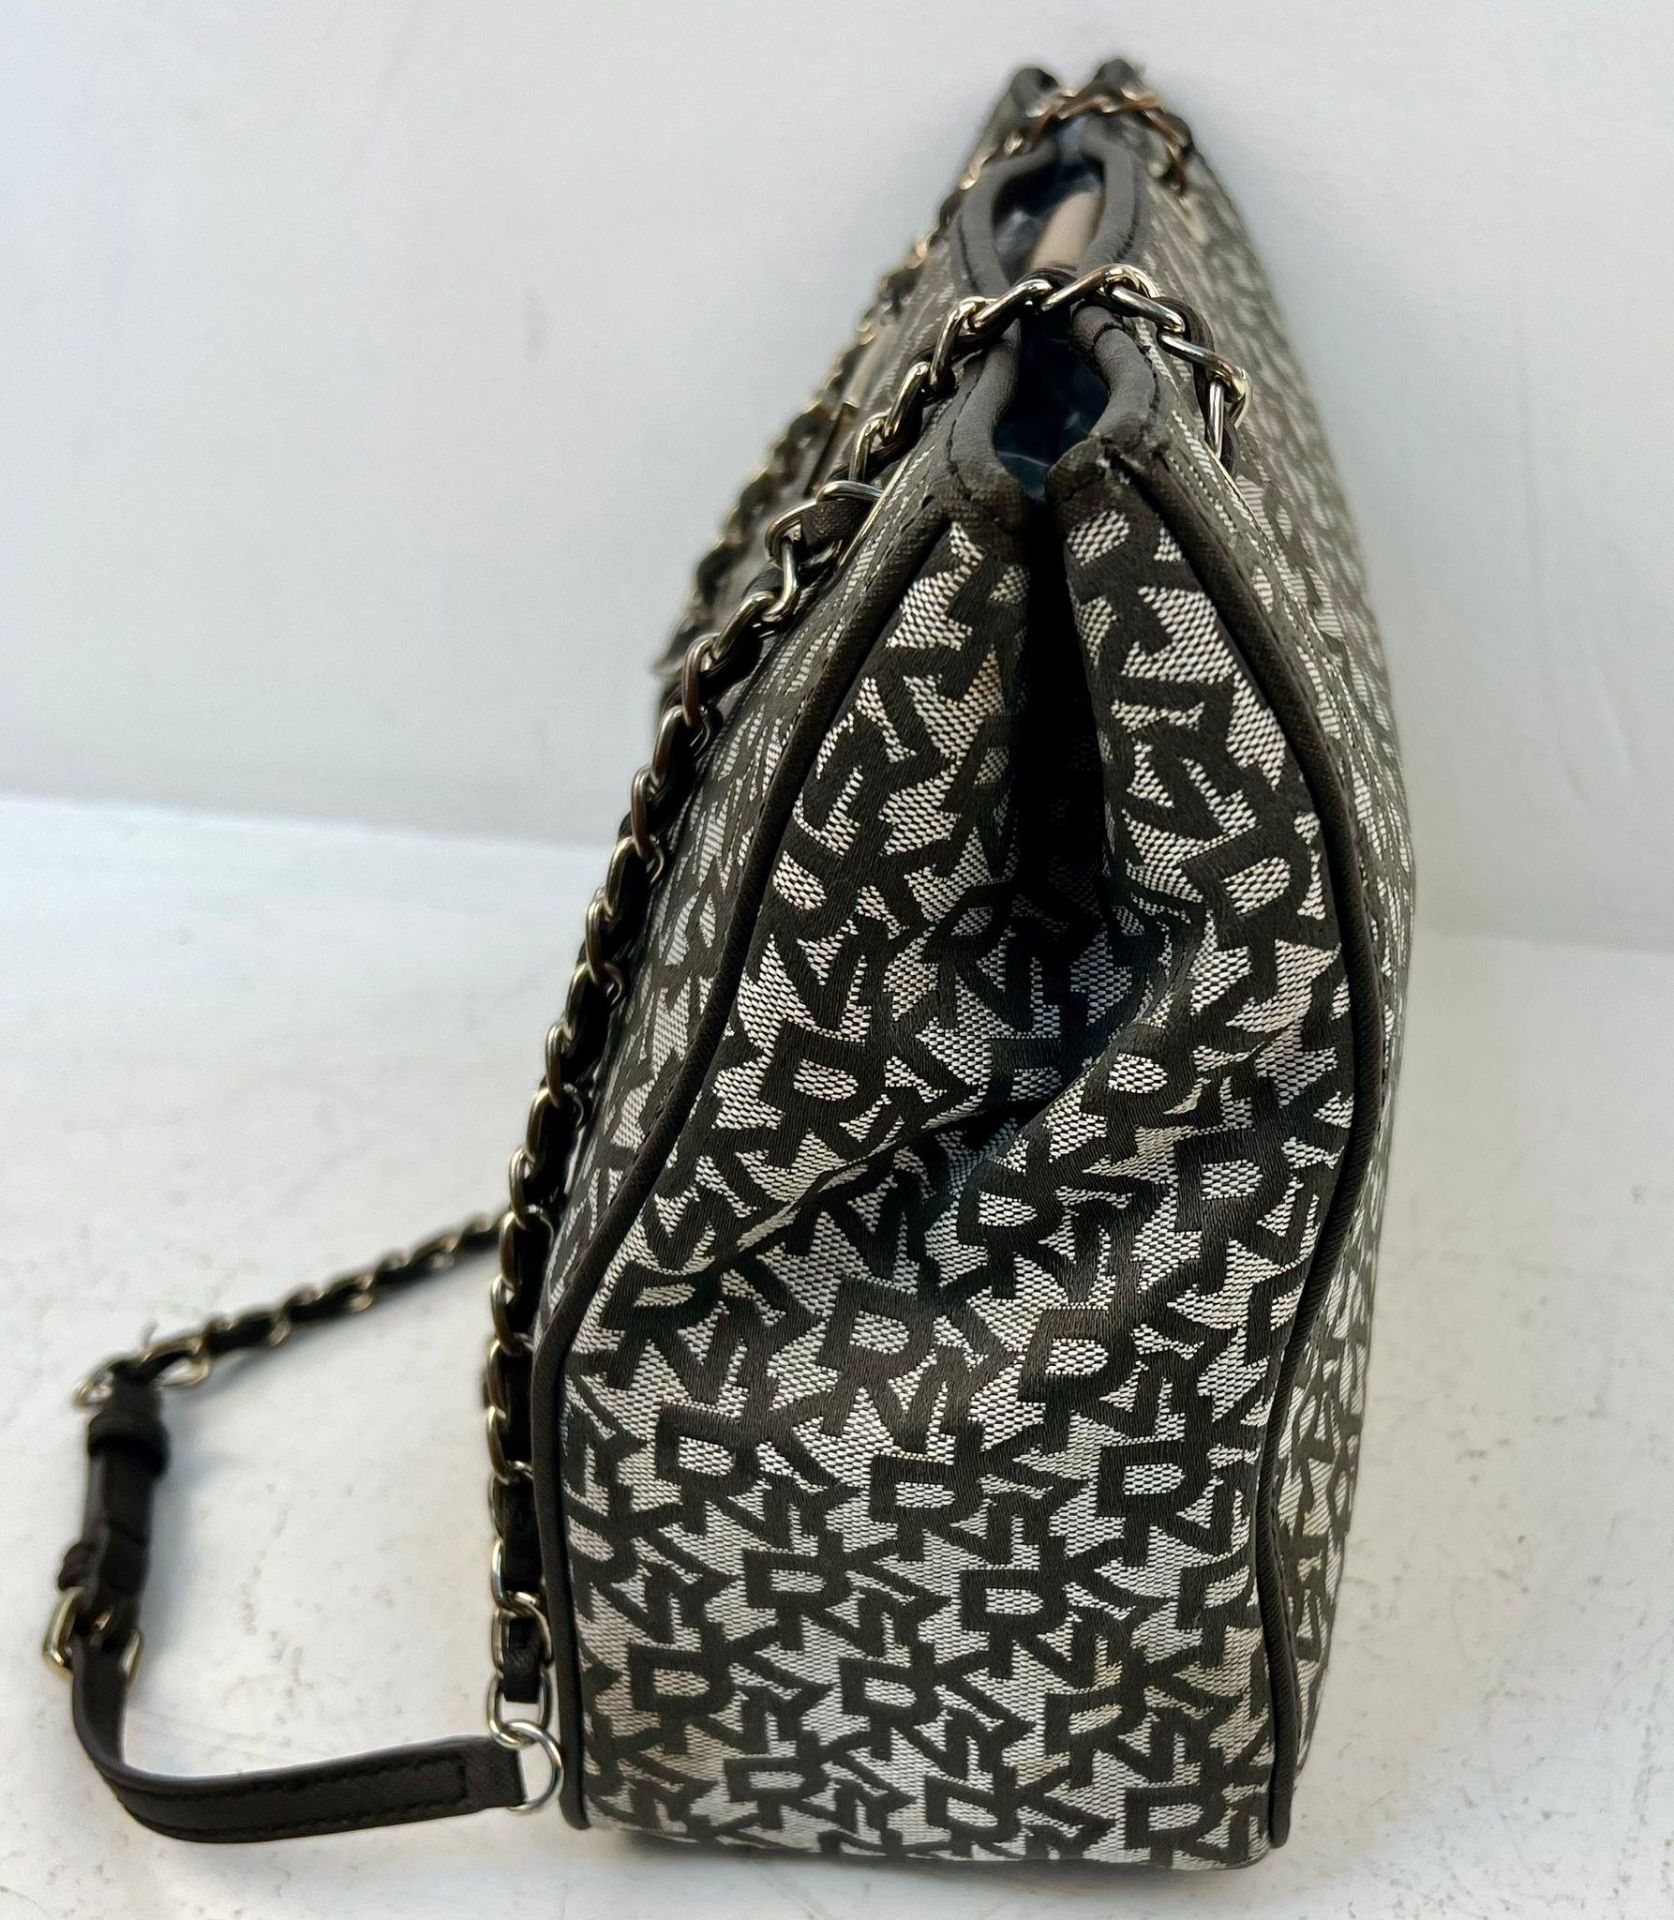 A DKNY Monogram Canvas Shoulder Bag with Dust-Cover. Spacious interior with zipped and open - Bild 3 aus 7